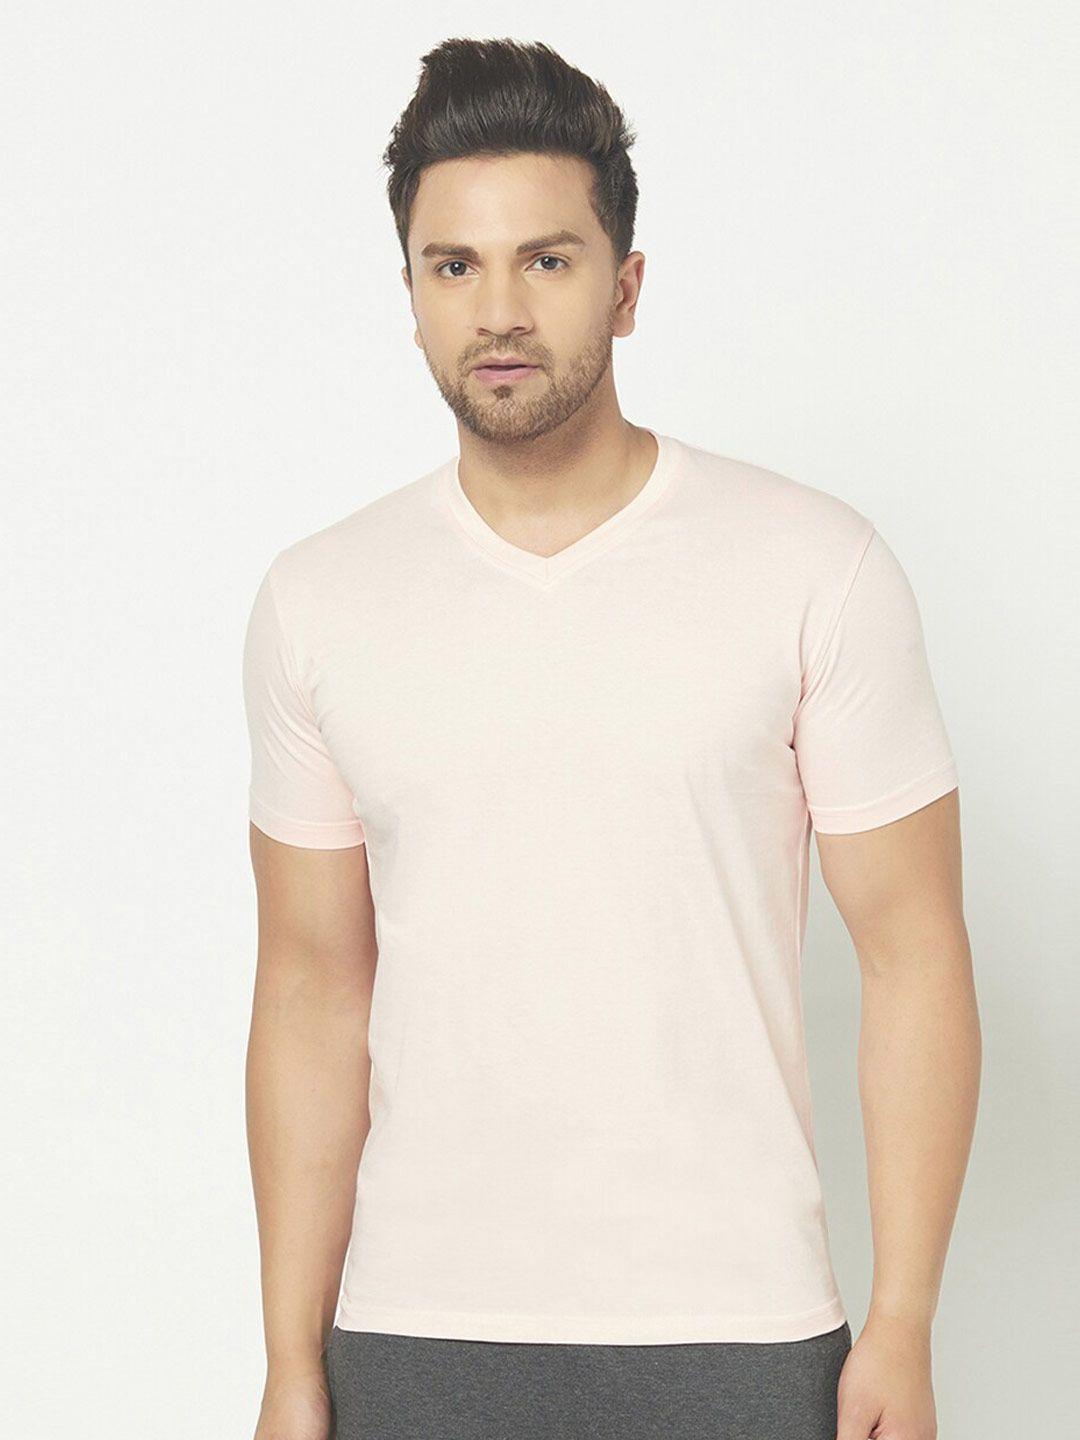 the daily outfits men peach-coloured v-neck t-shirt